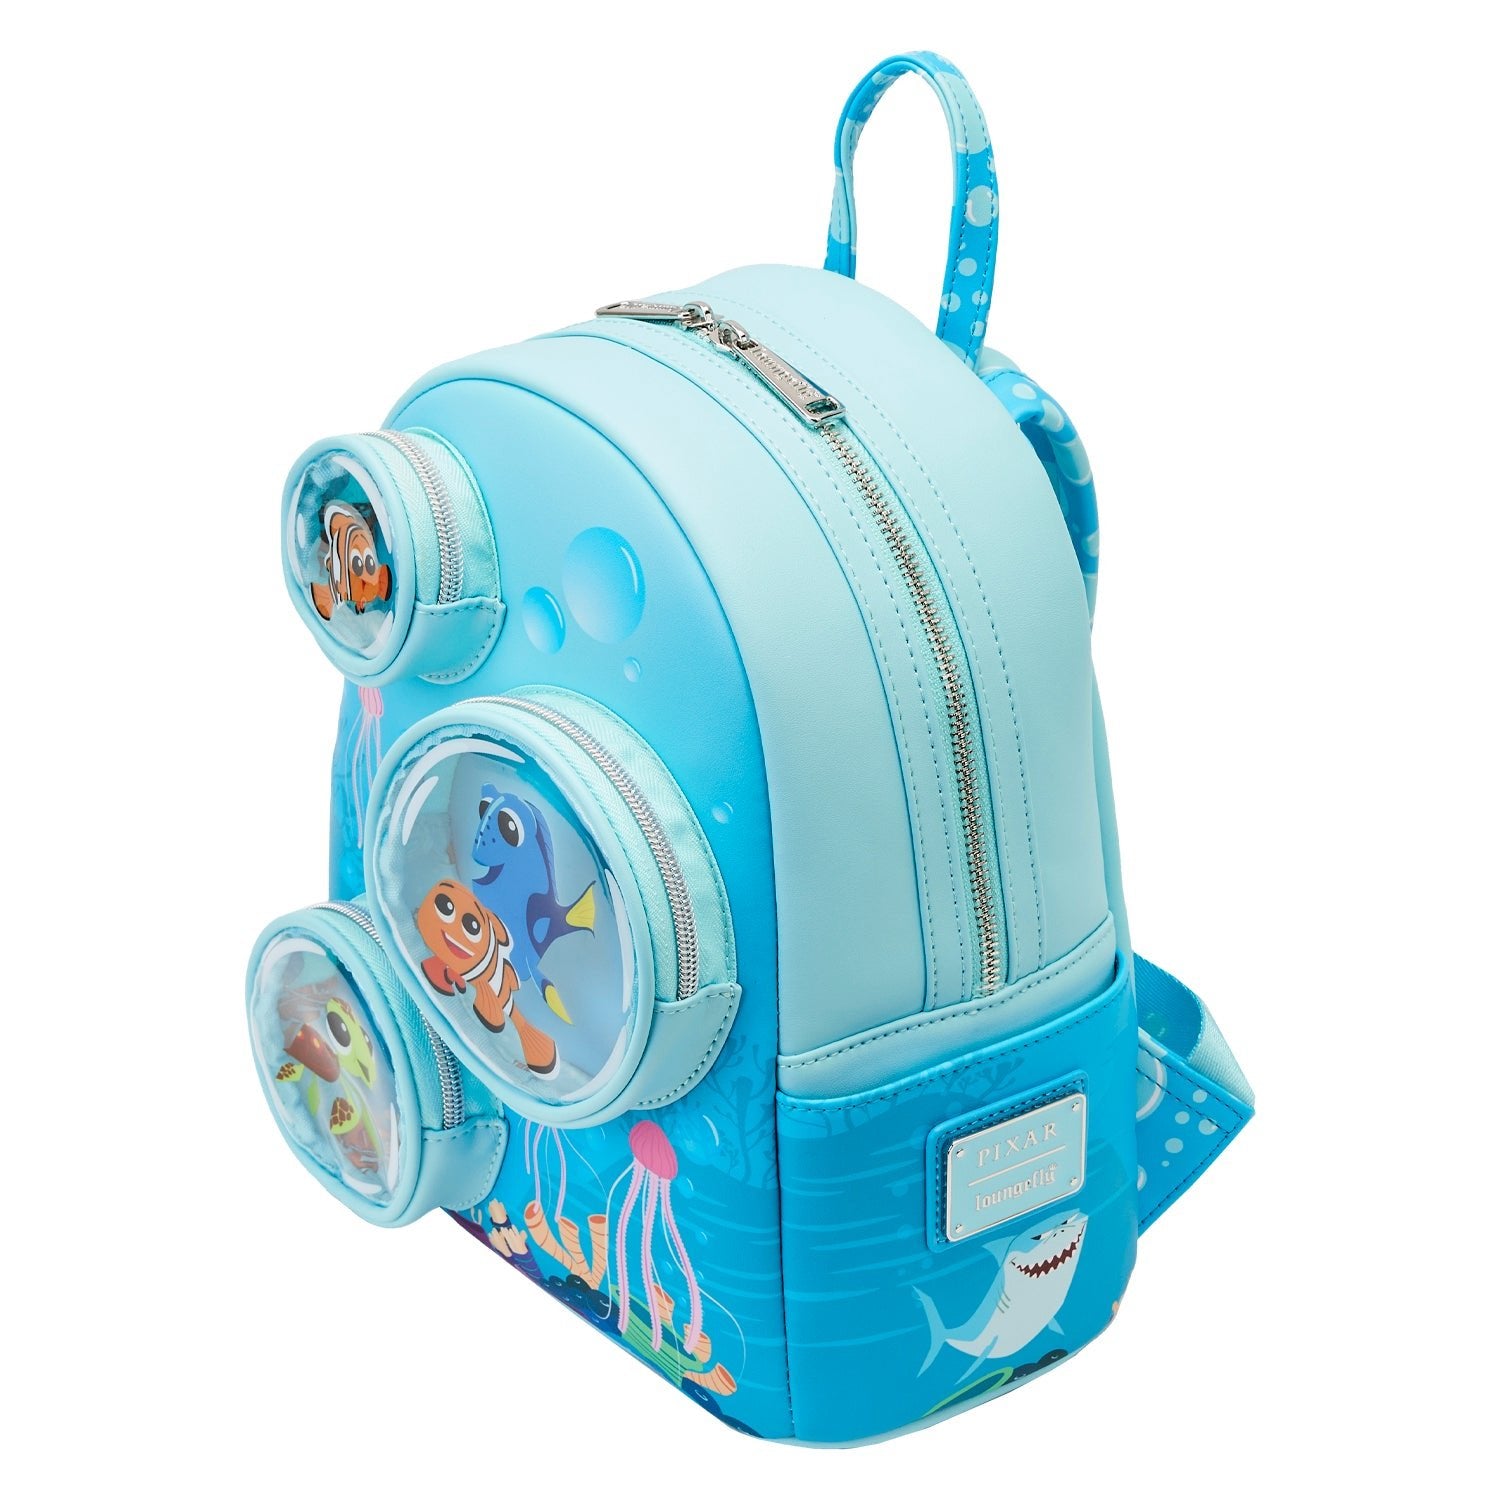 Loungefly x Disney Pixar Finding Nemo 20th Anniversary Bubble Pockets Mini Backpack - GeekCore